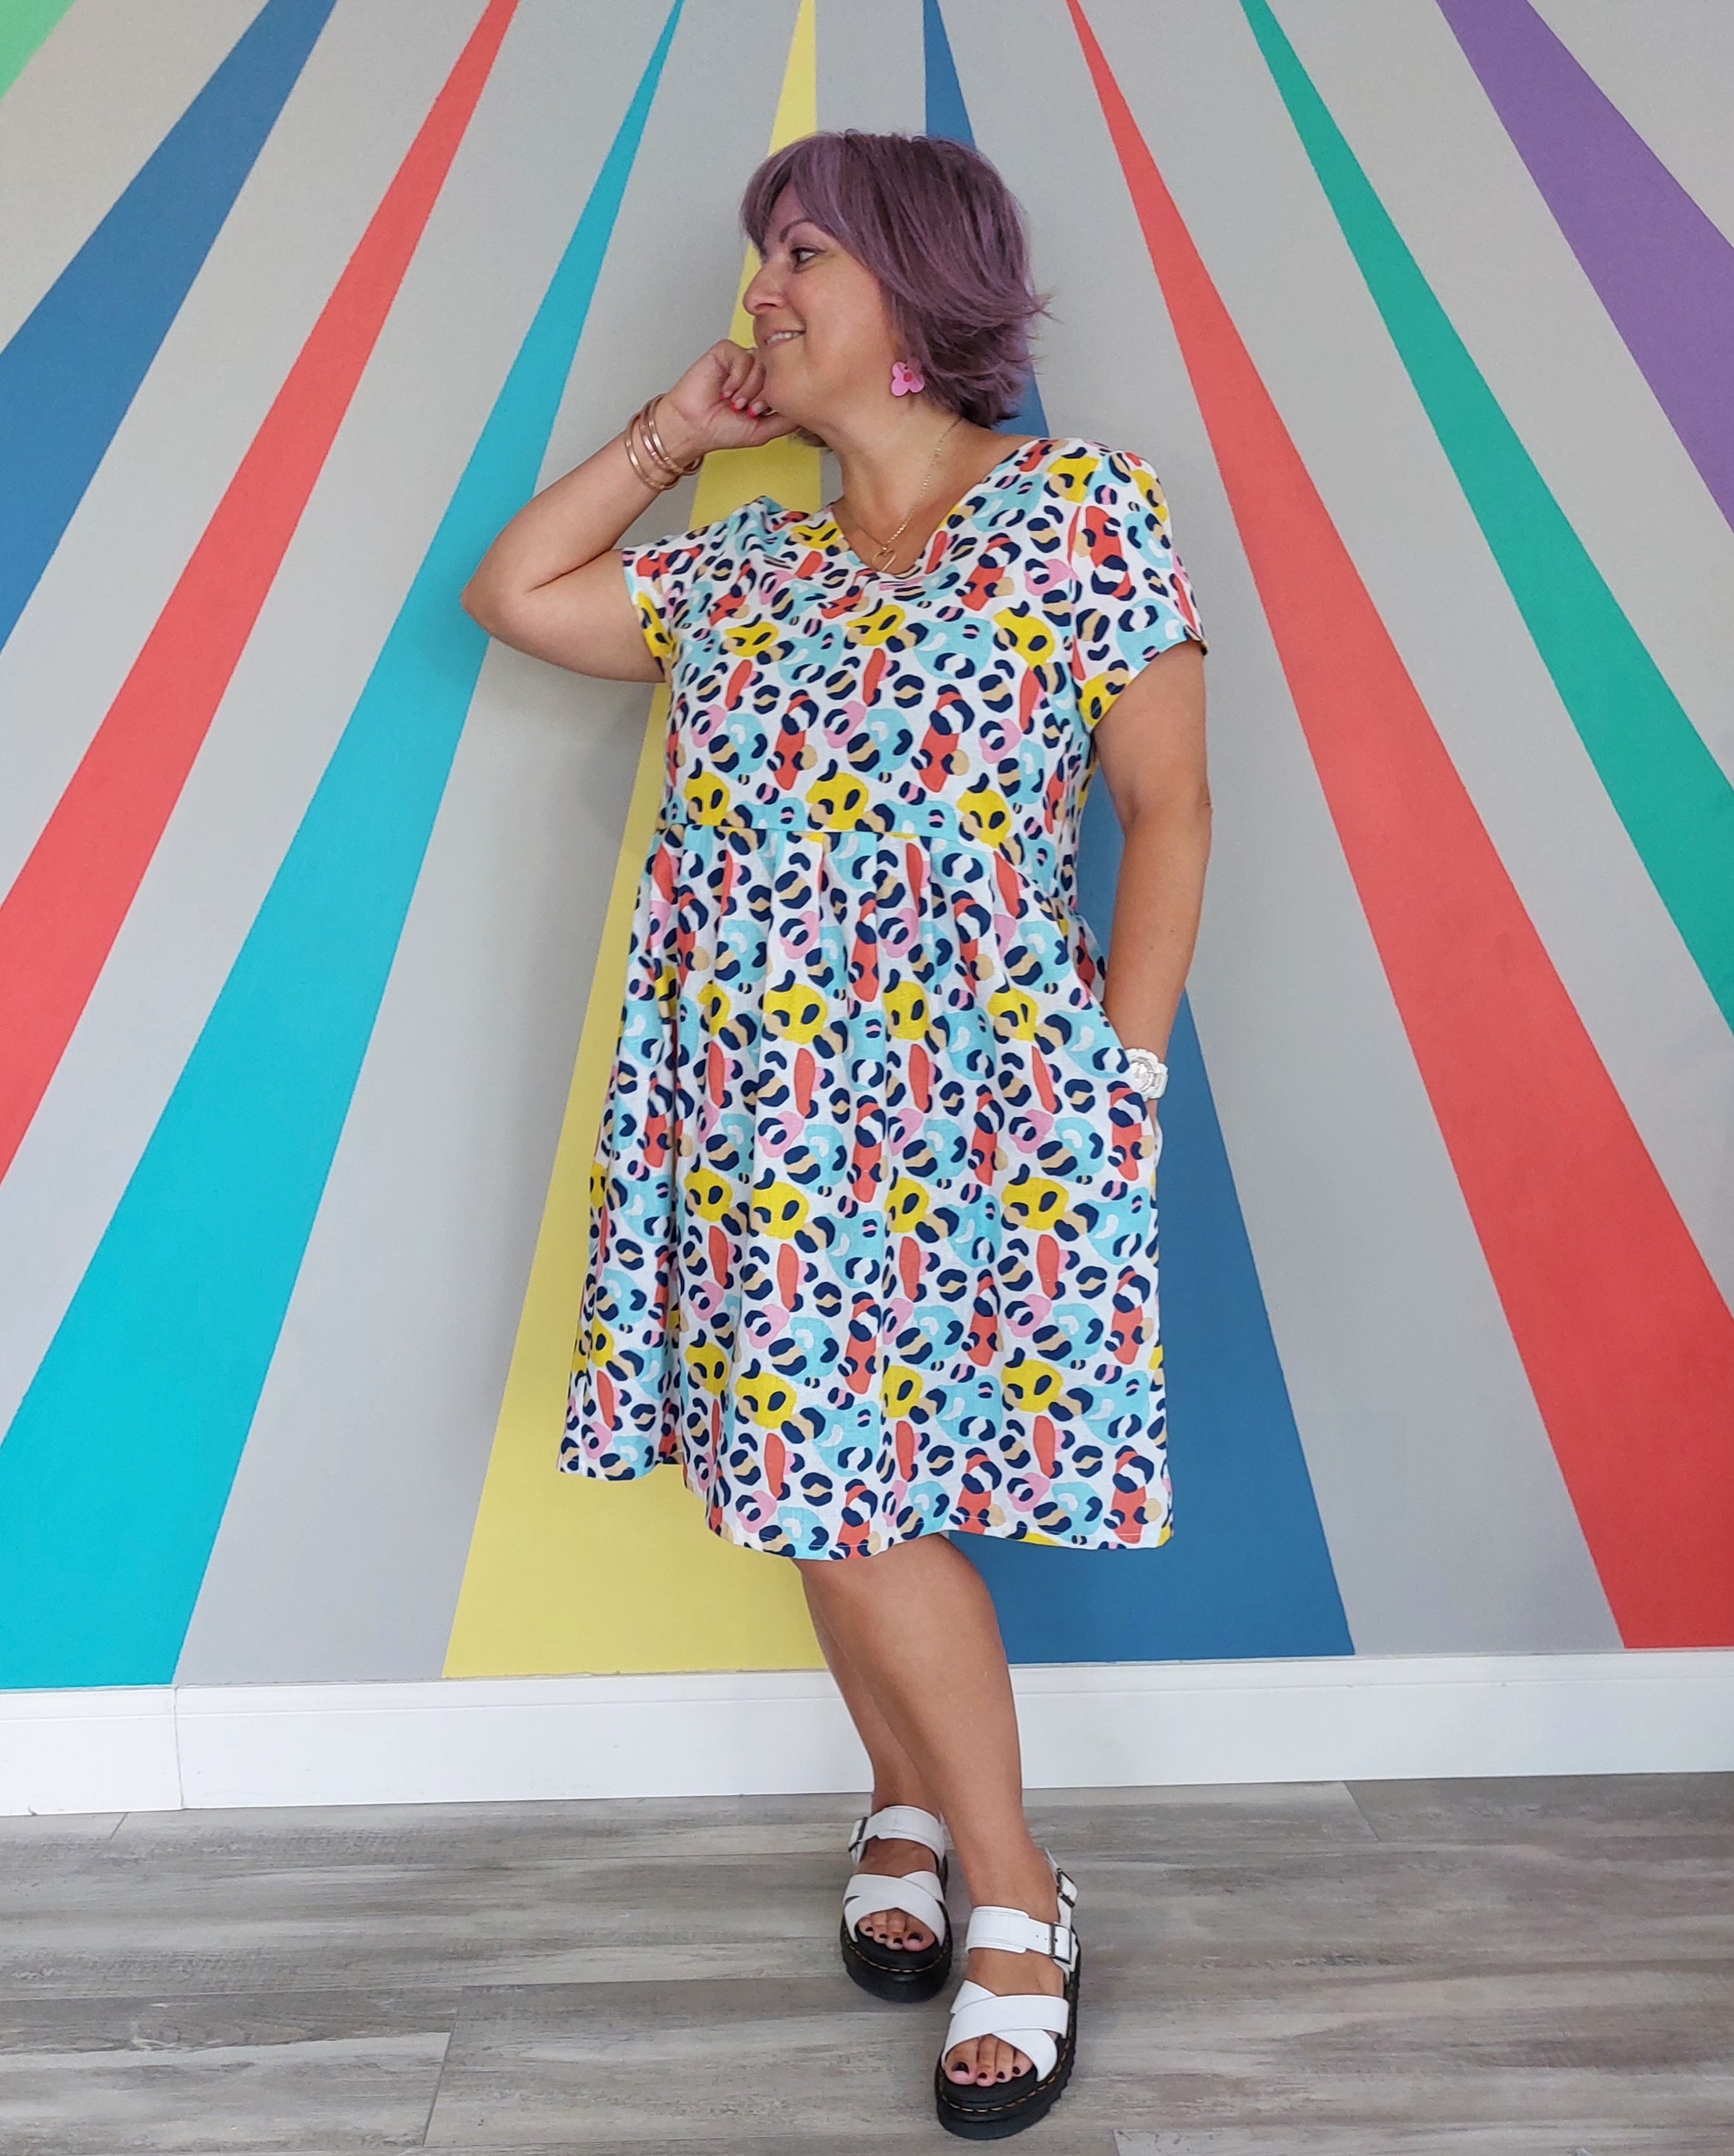 Nelly Wade Dress in Animal Bright